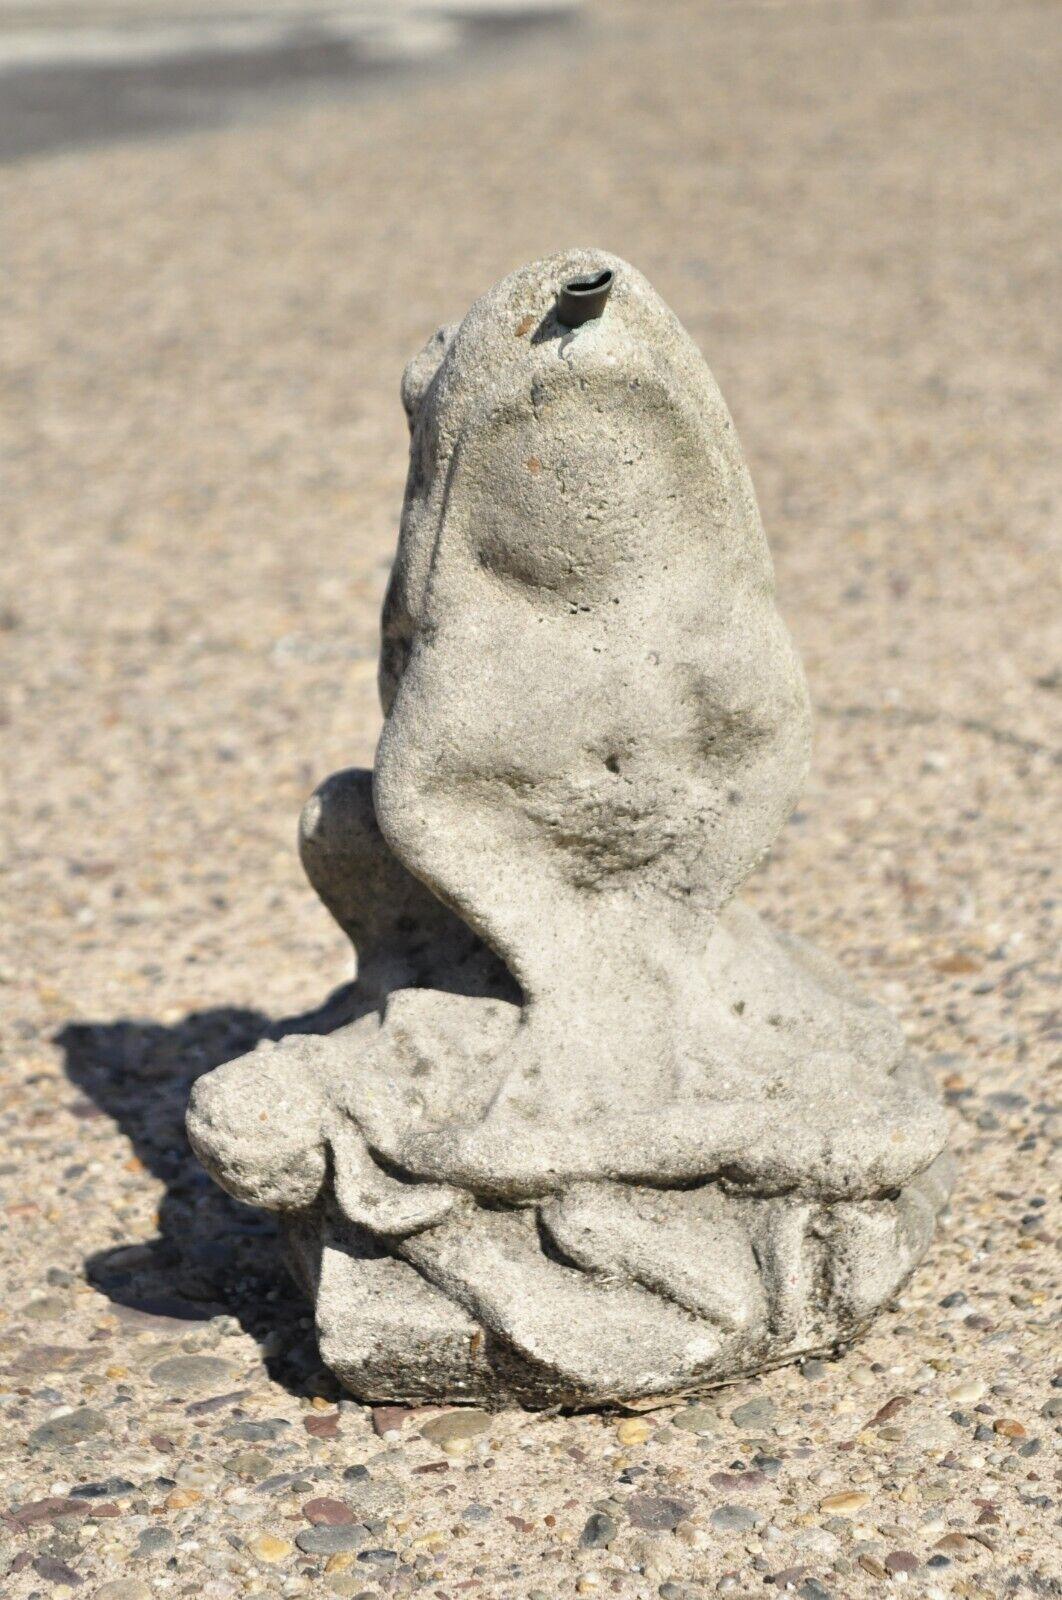 Vintage cement concrete small figural garden frog lawn ornament water fountain. Item features nice cast stone construction, approx. 25 lbs, very nice vintage item, great style and form. Circa mid-20th century. Measurements: 14